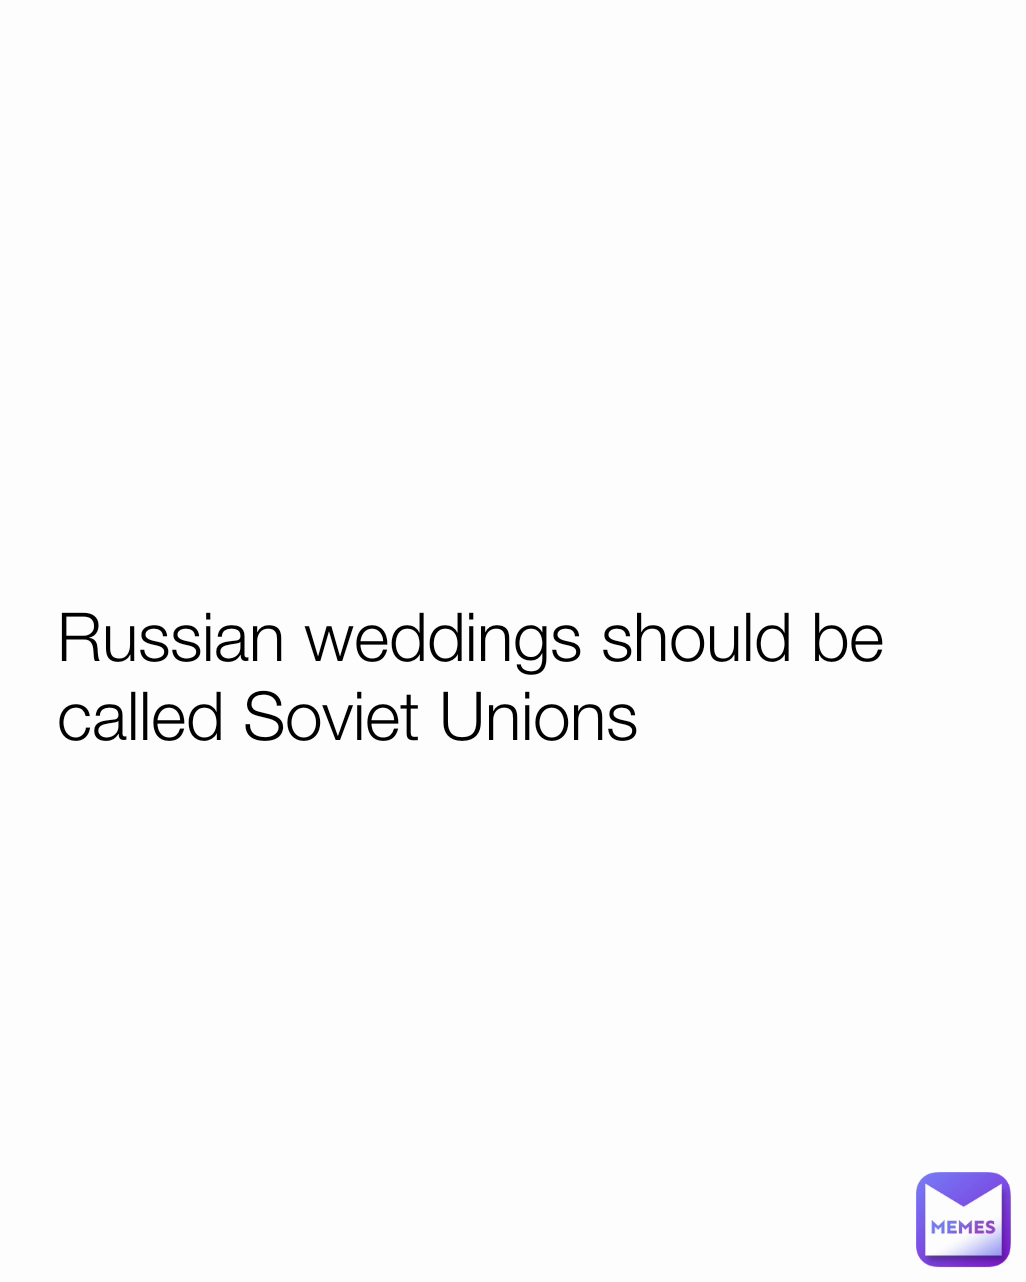 Russian weddings should be called Soviet Unions